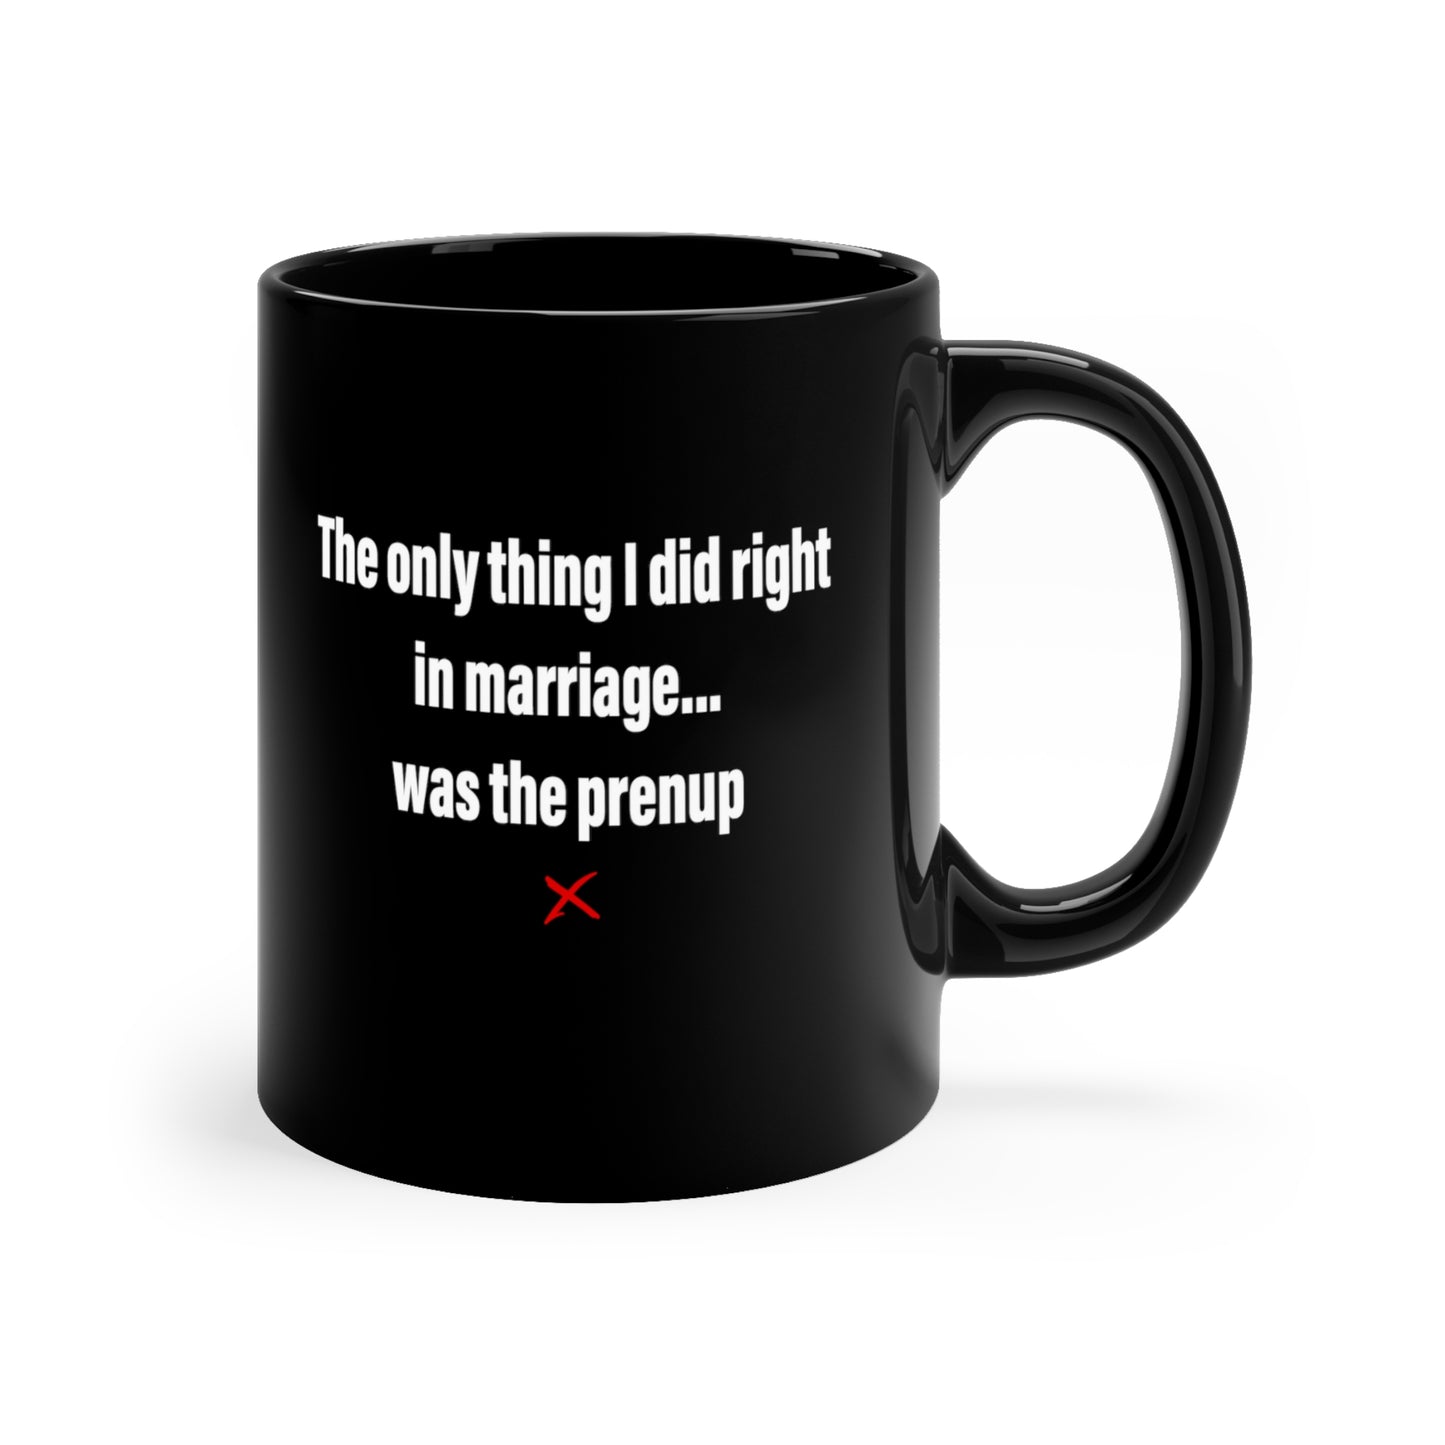 The only thing I did right in marriage... was the prenup - Mug